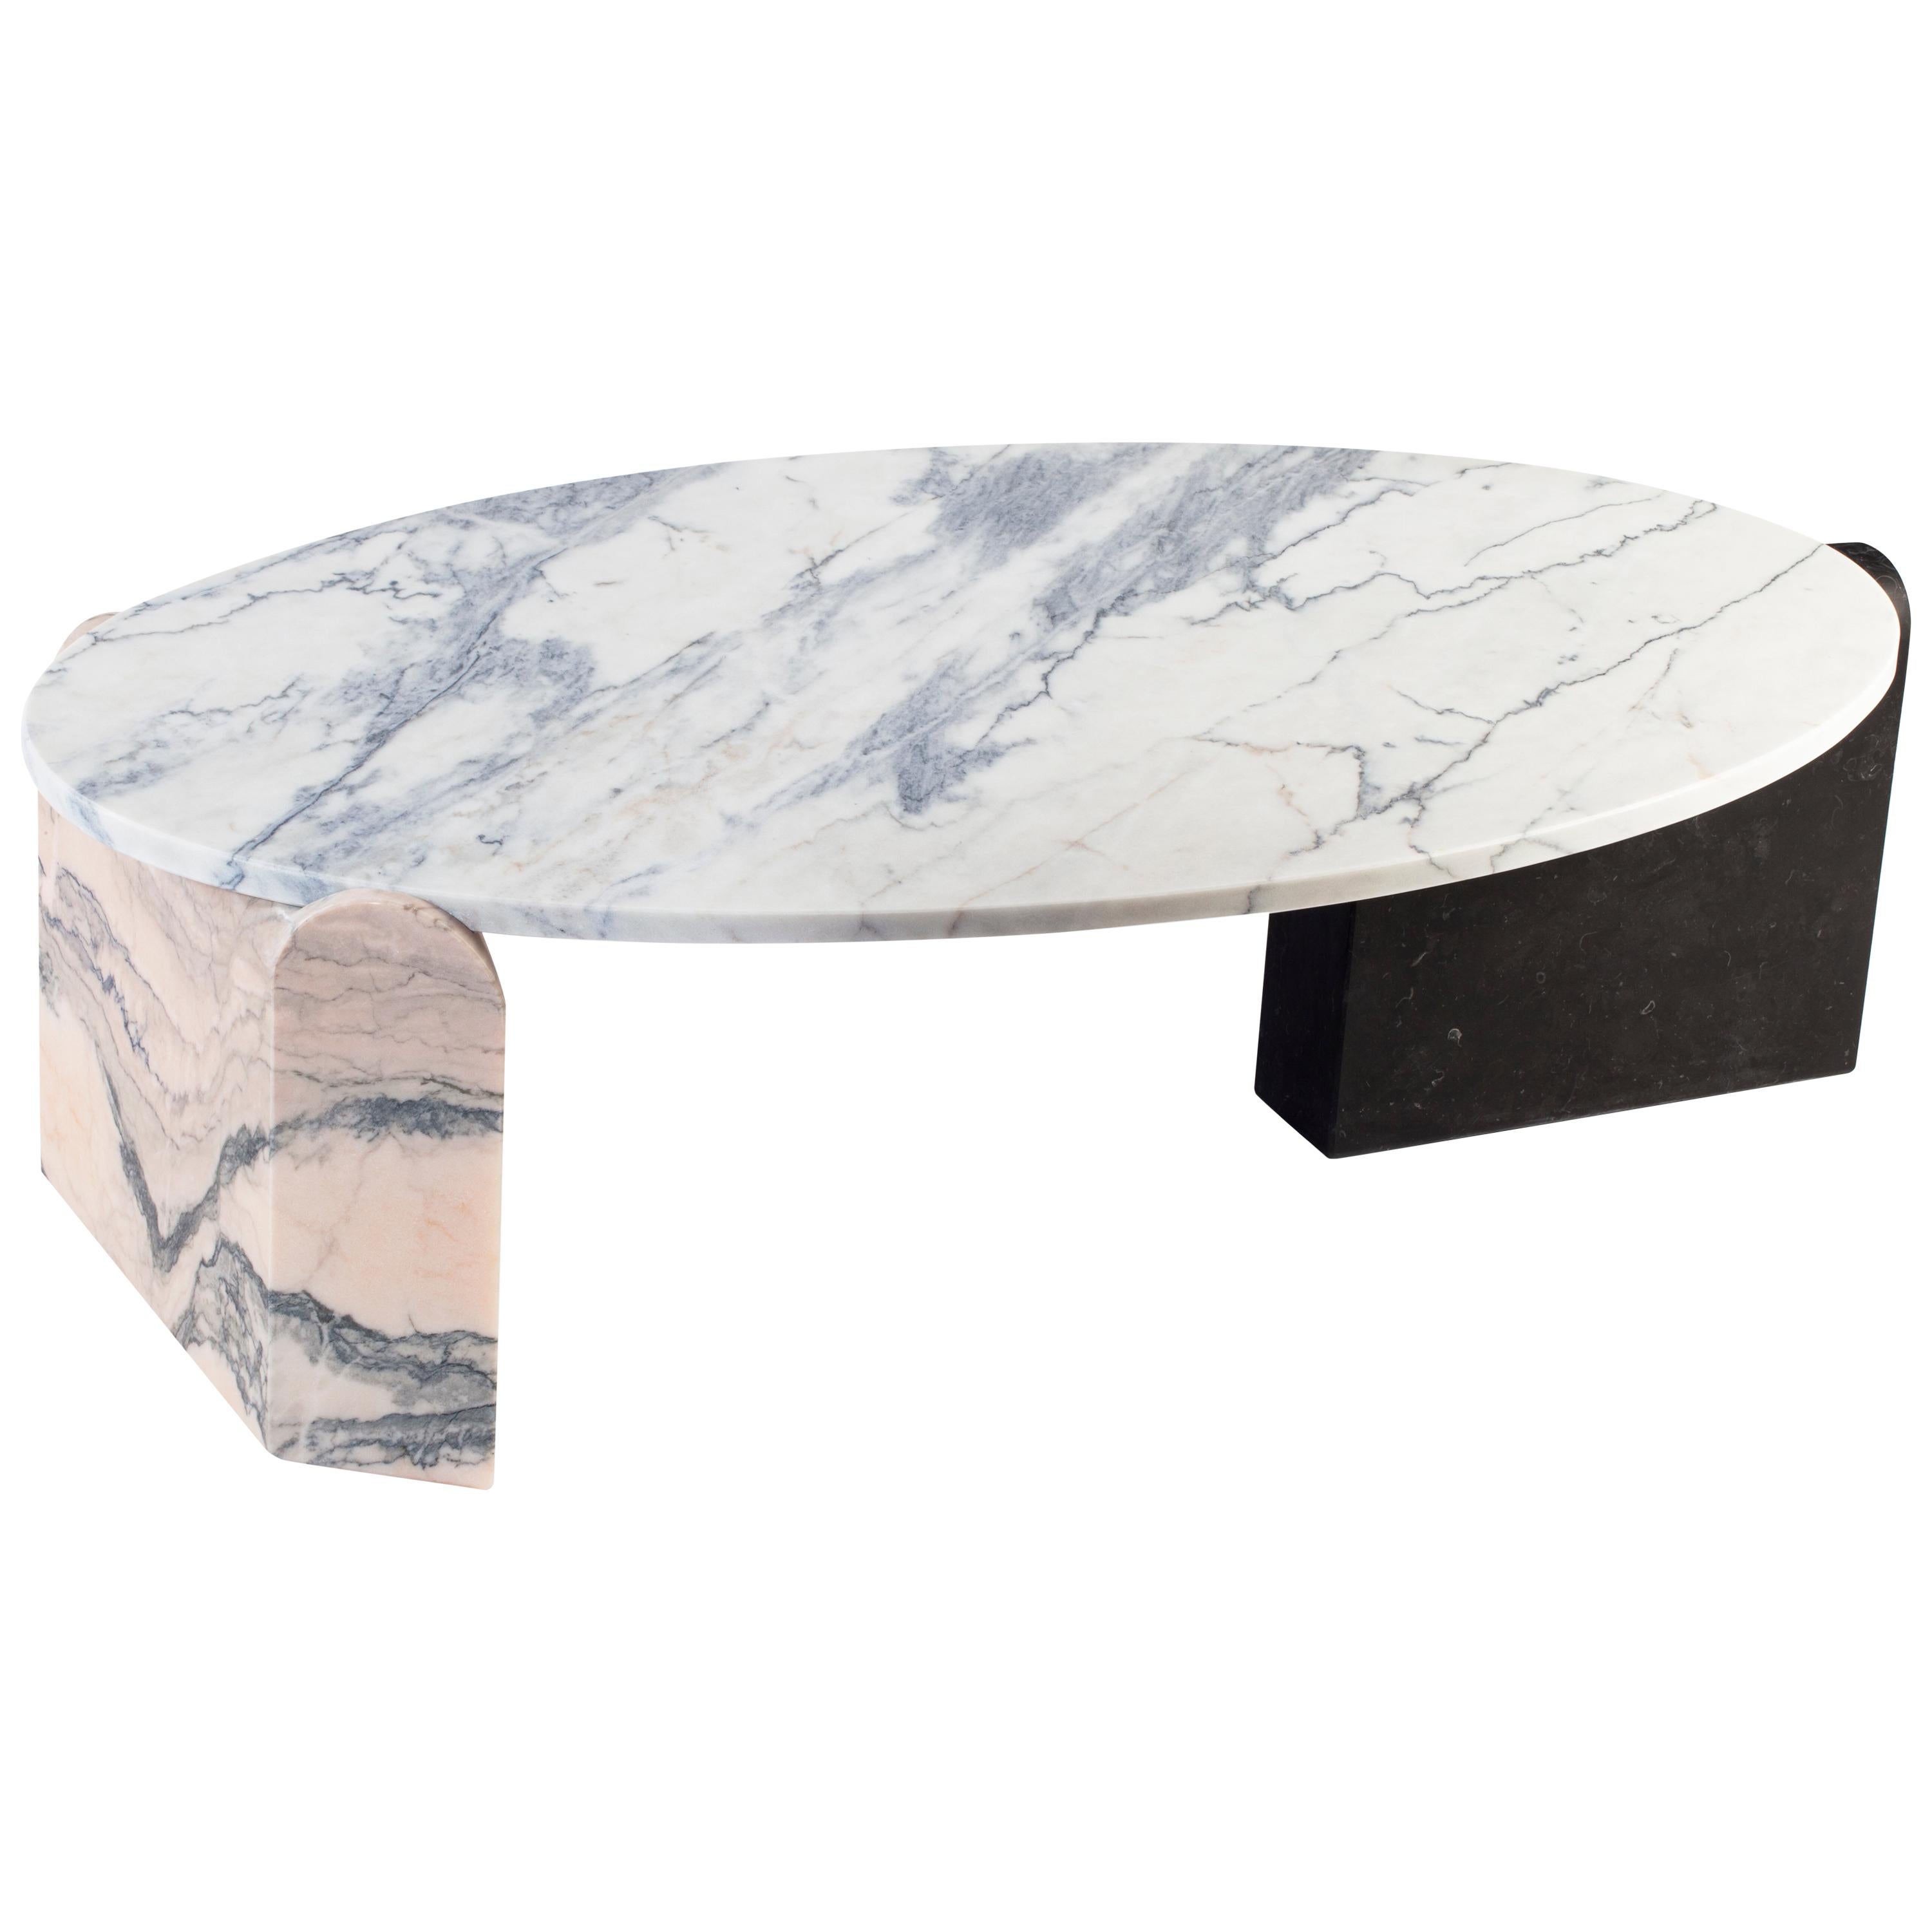 Brutalist Organic Modern Center Table Jean in Natural Travertine Marble Stone For Sale